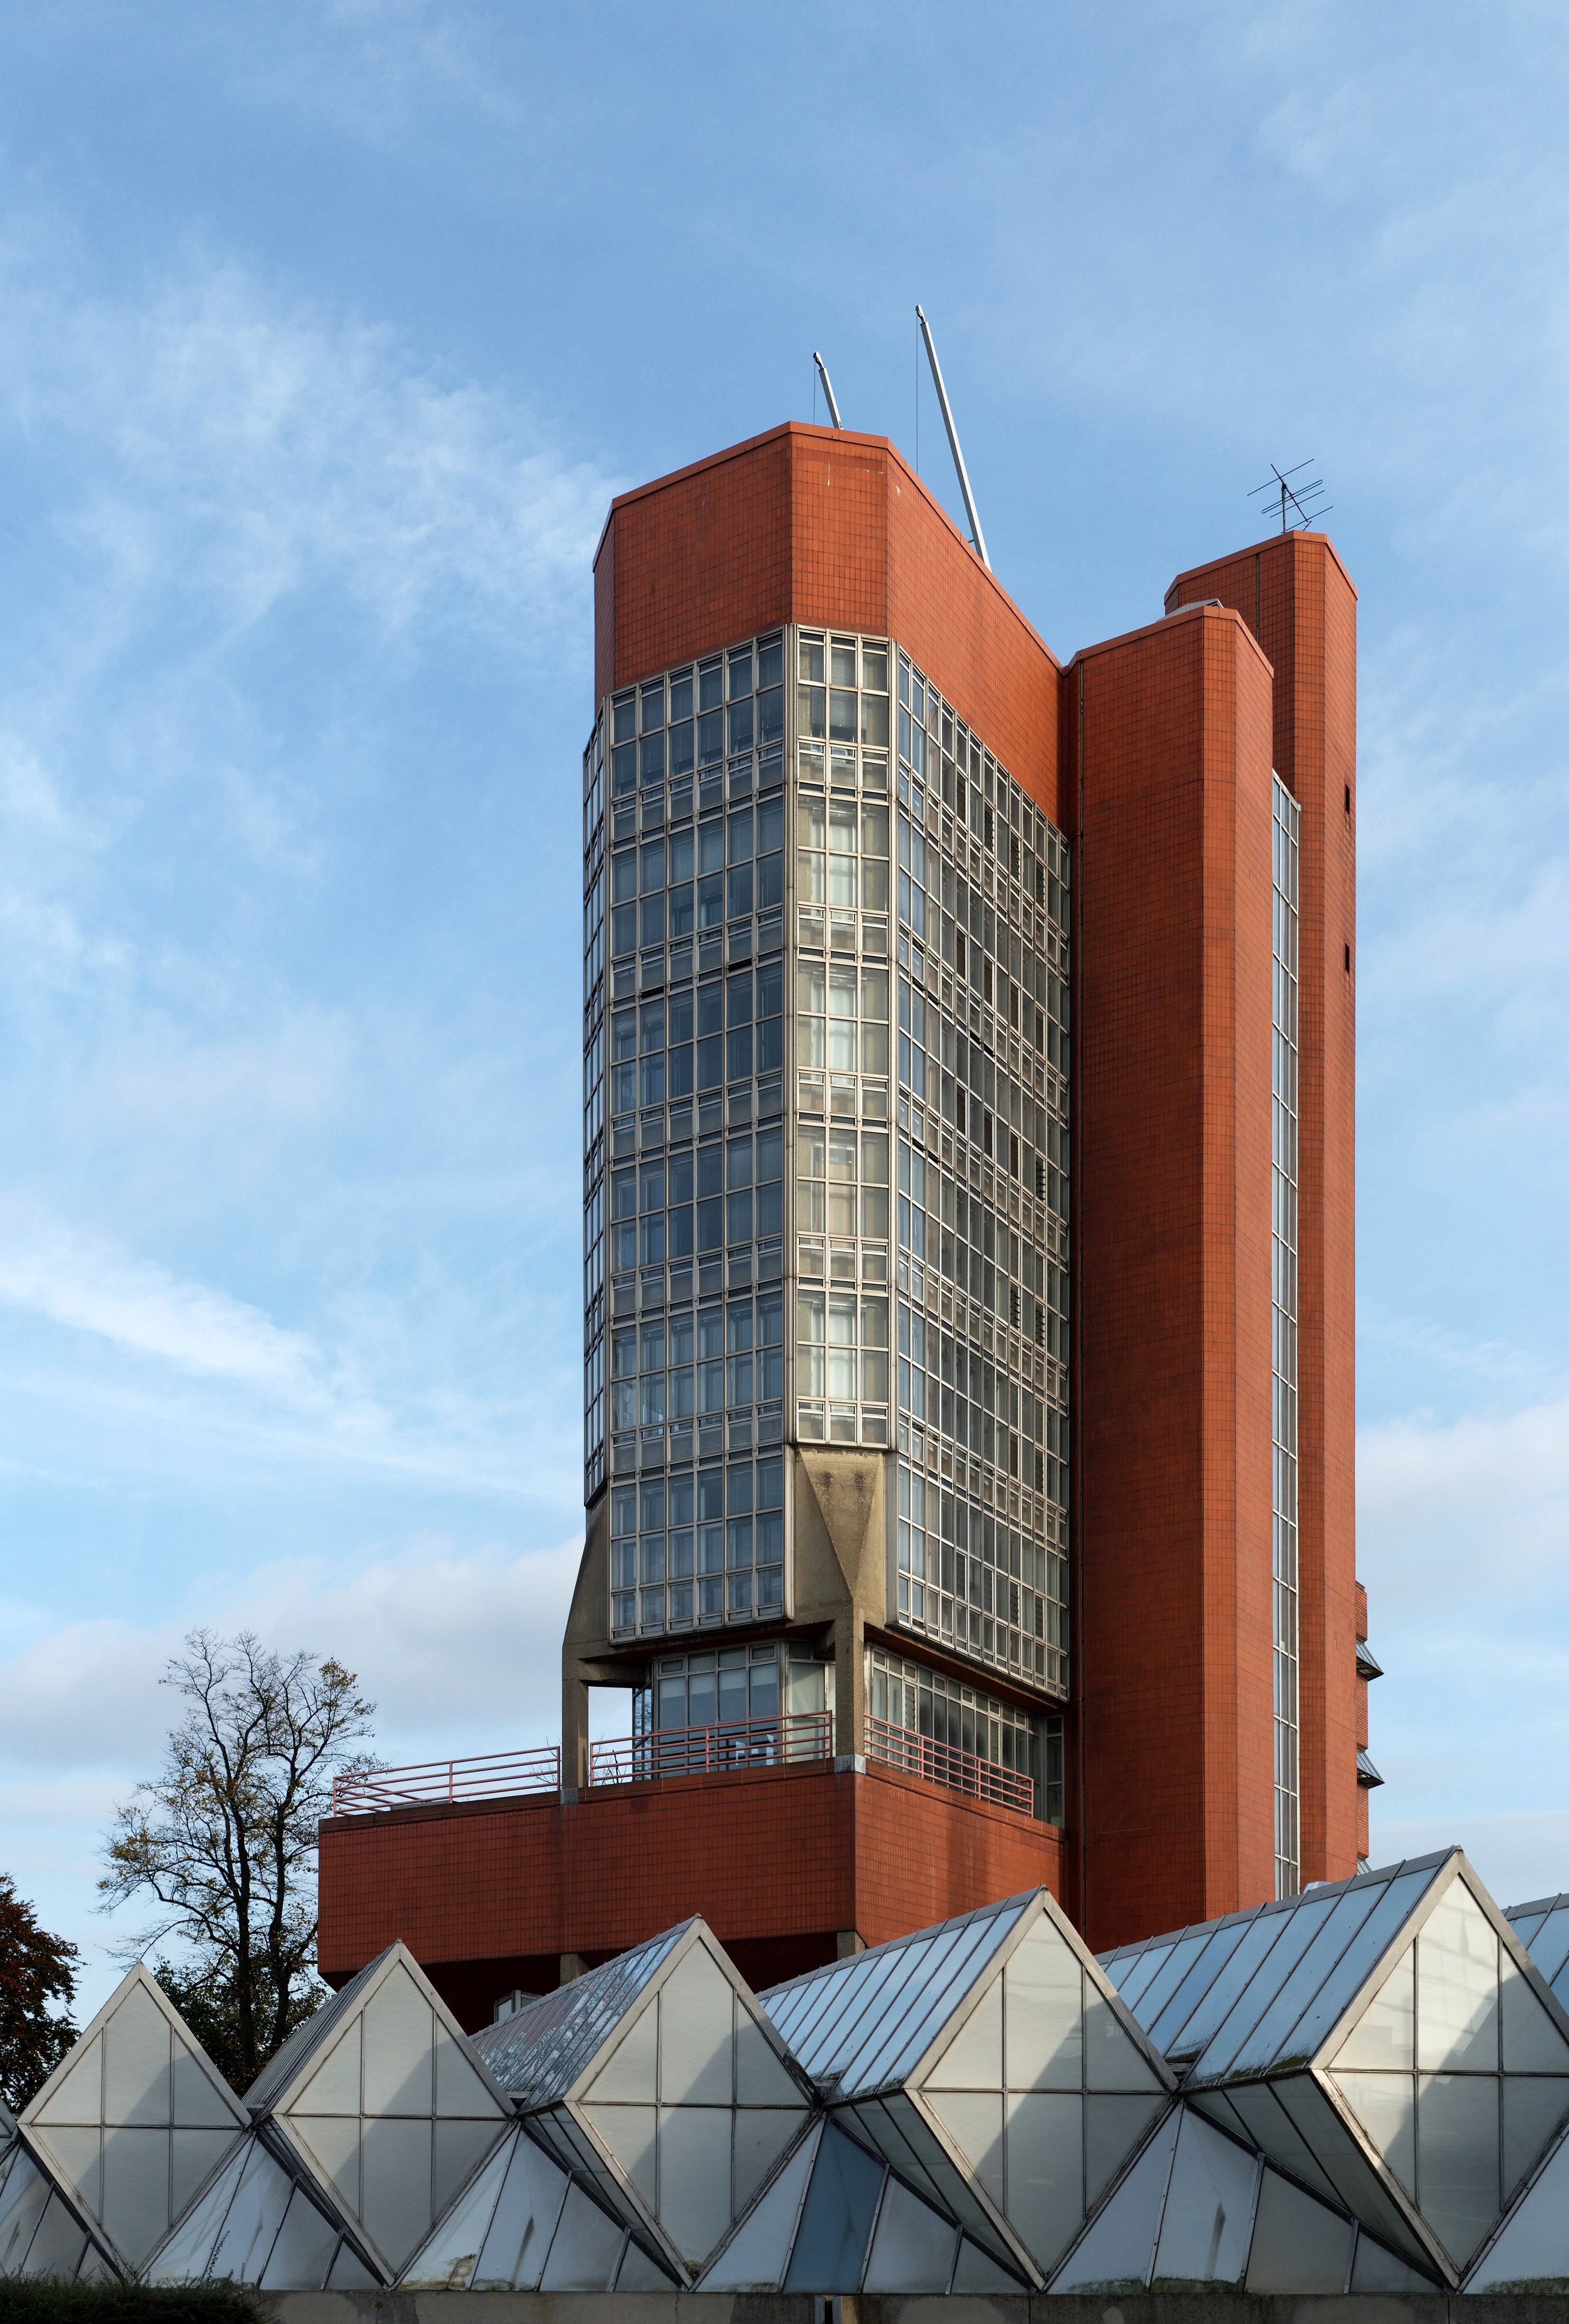 University of Leicester Engineering Building